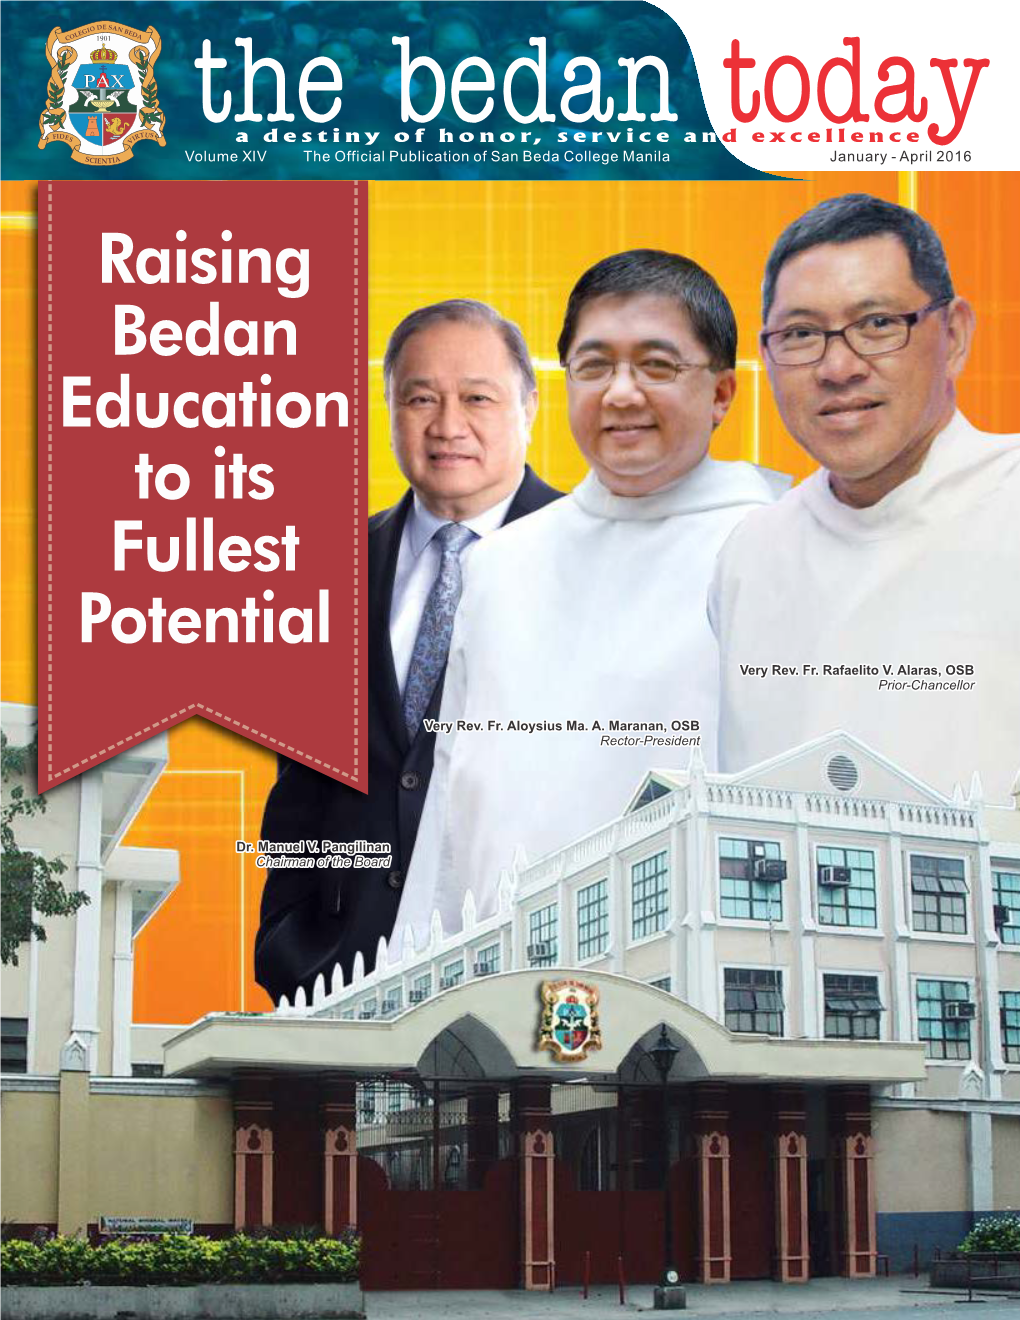 The Bedan Today a D E S T I N Y O F H O N O R, S E R V I C E a N D E X C E L L E N C E Editor in Chief Dr